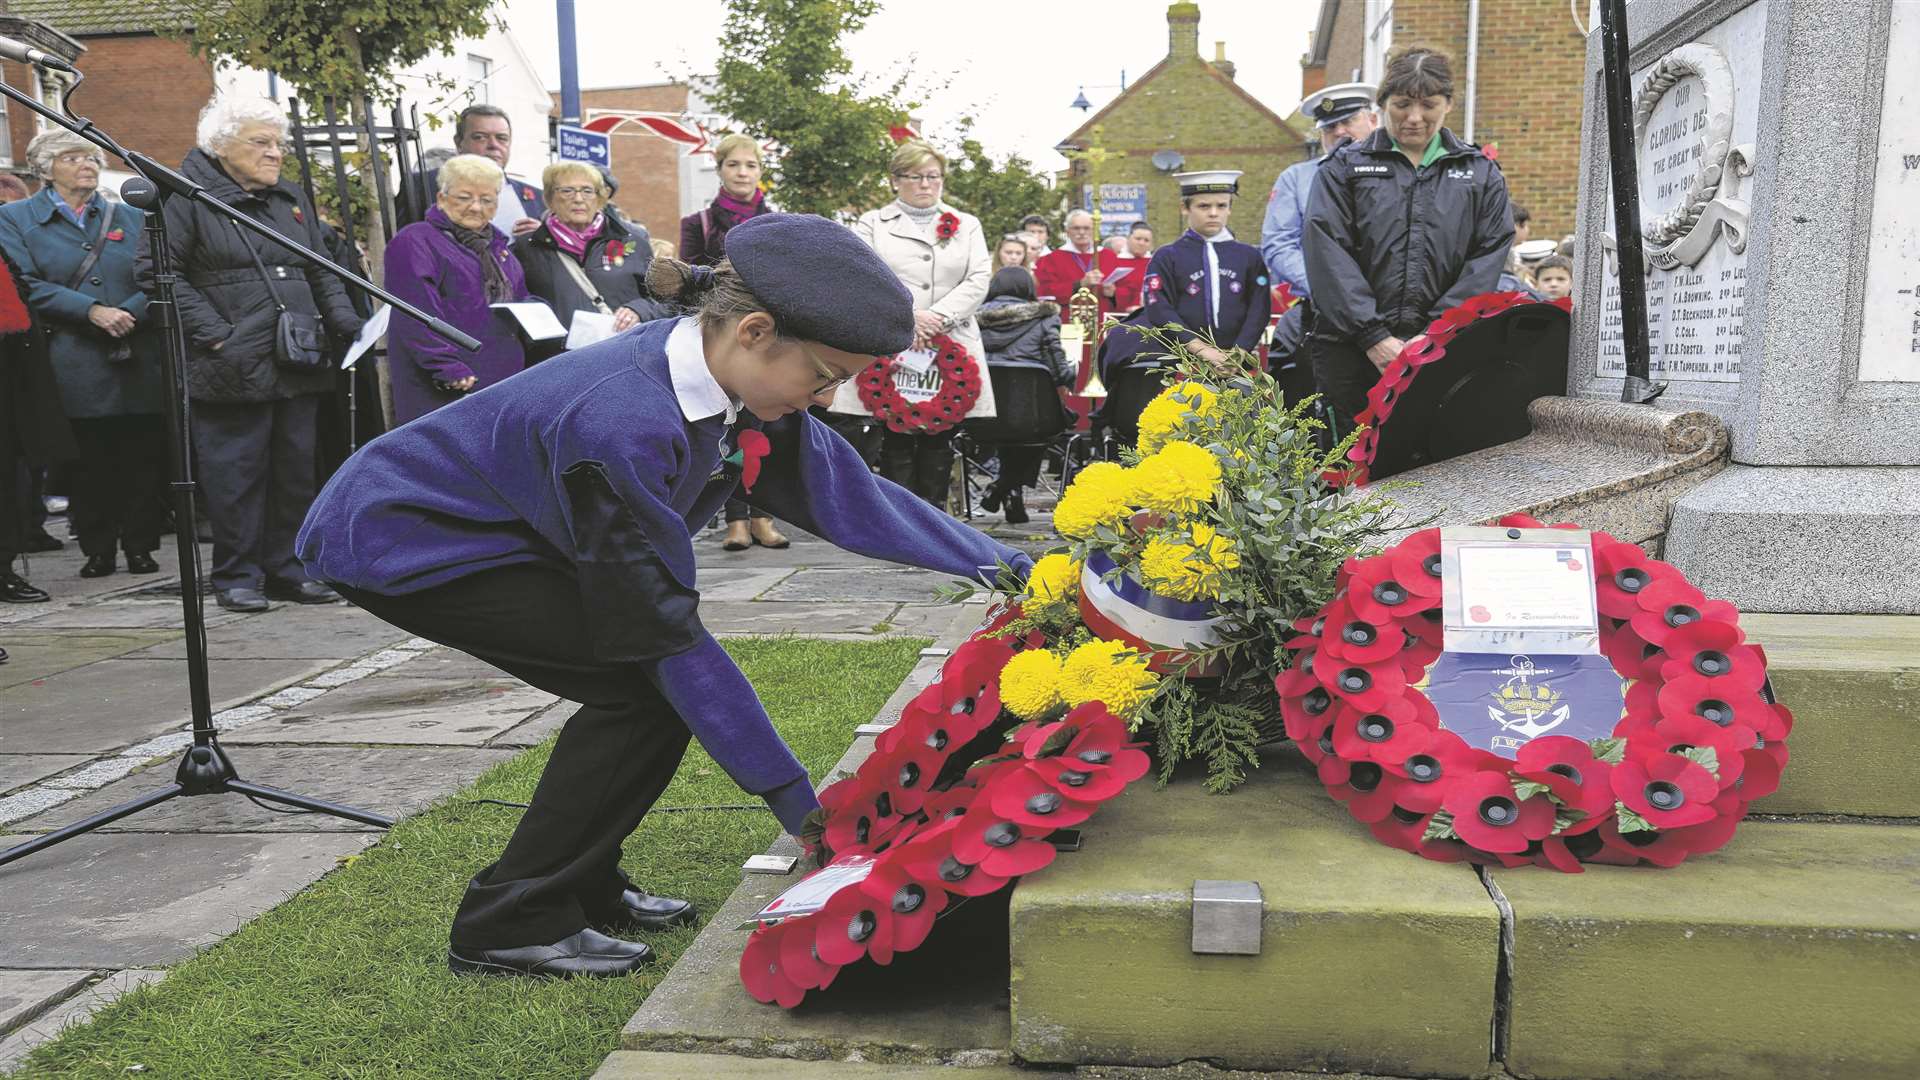 Wreaths laid during the Remembrance Day service in Whitstable